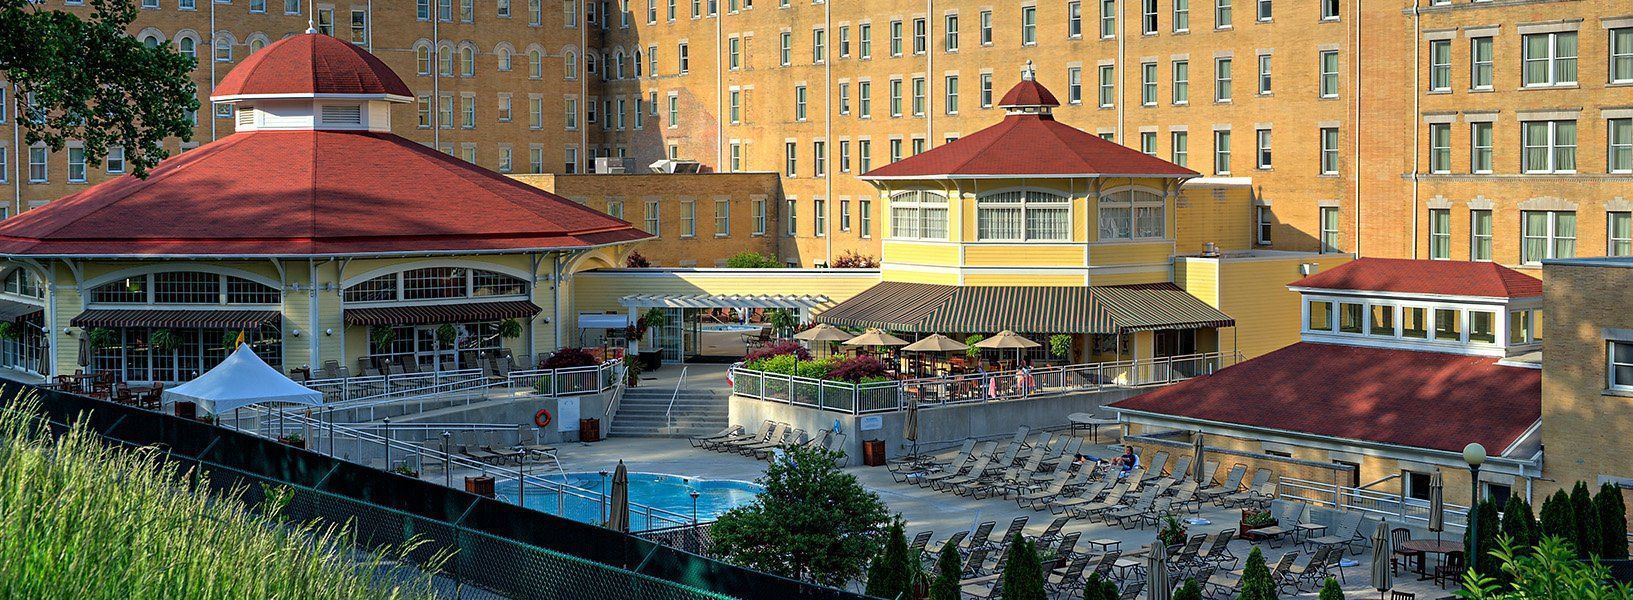 French lick hotel french lick in